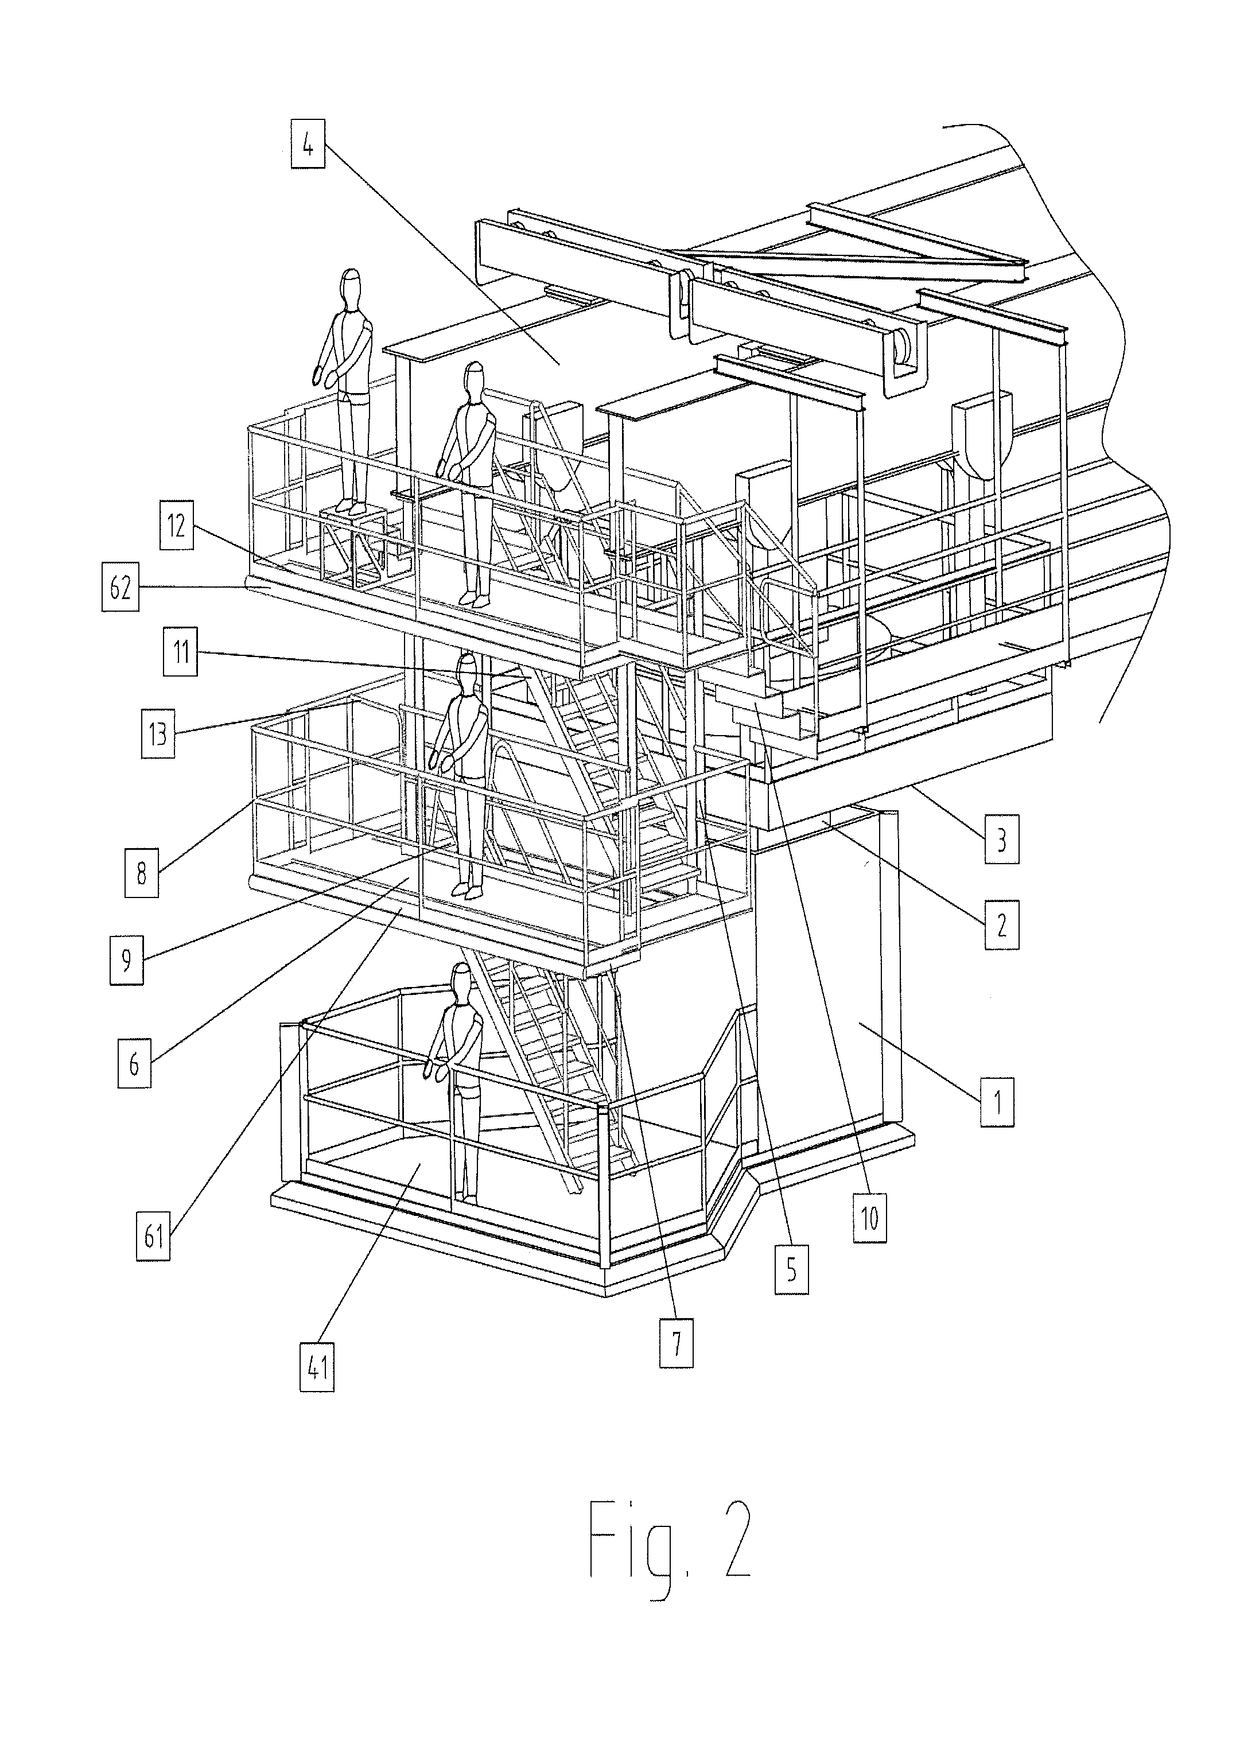 Apparatus for treating the surface or carrying out maintenance and/or  inspection tasks of a vertical stabilizer of an aerial vehicle in a low interior height hangar